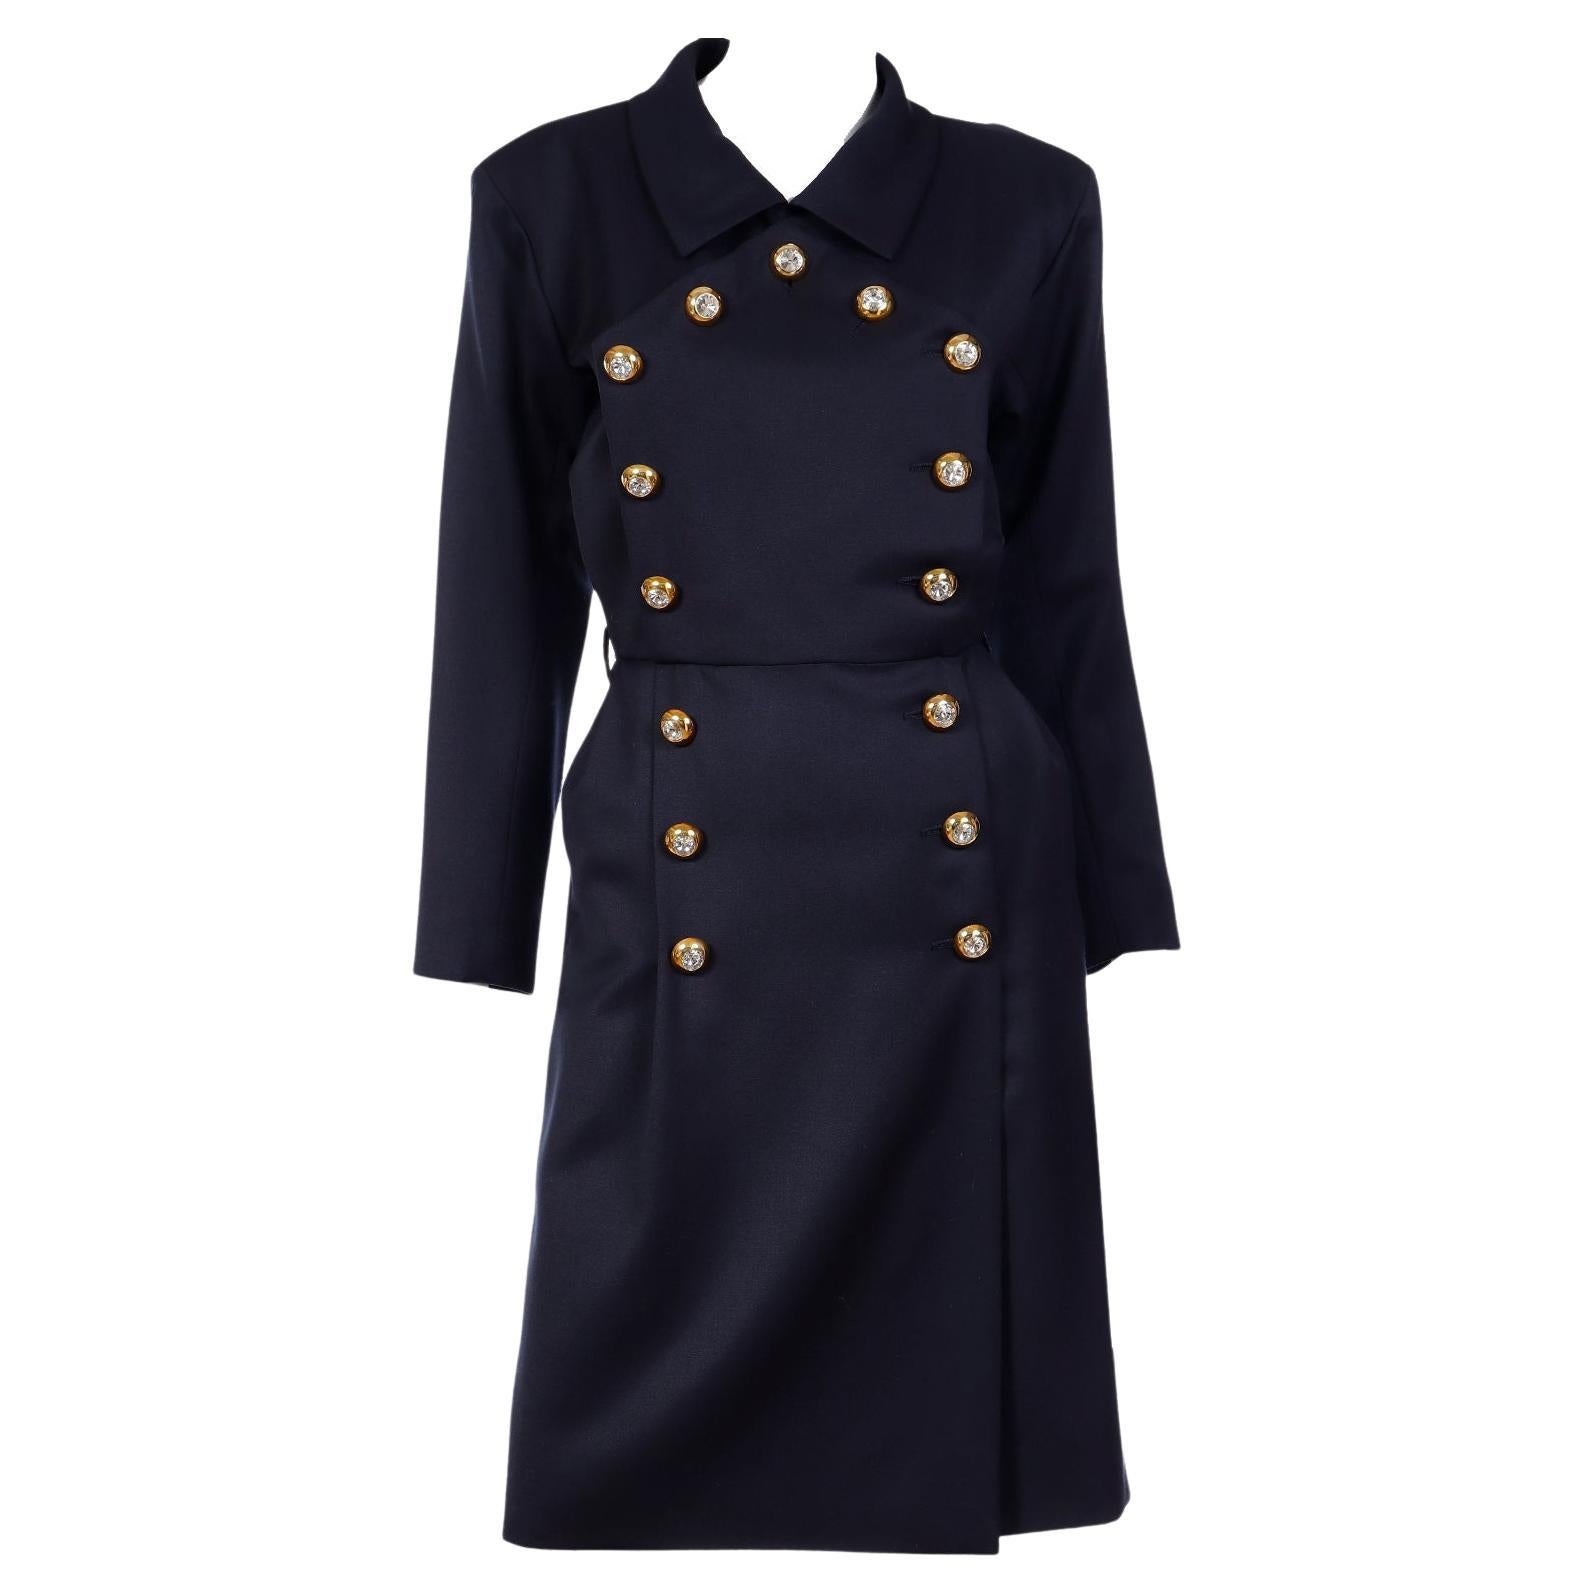 1992 Yves Saint Laurent Vintage Navy Blue Runway Dress W Gold & Crystal Buttons For Sale